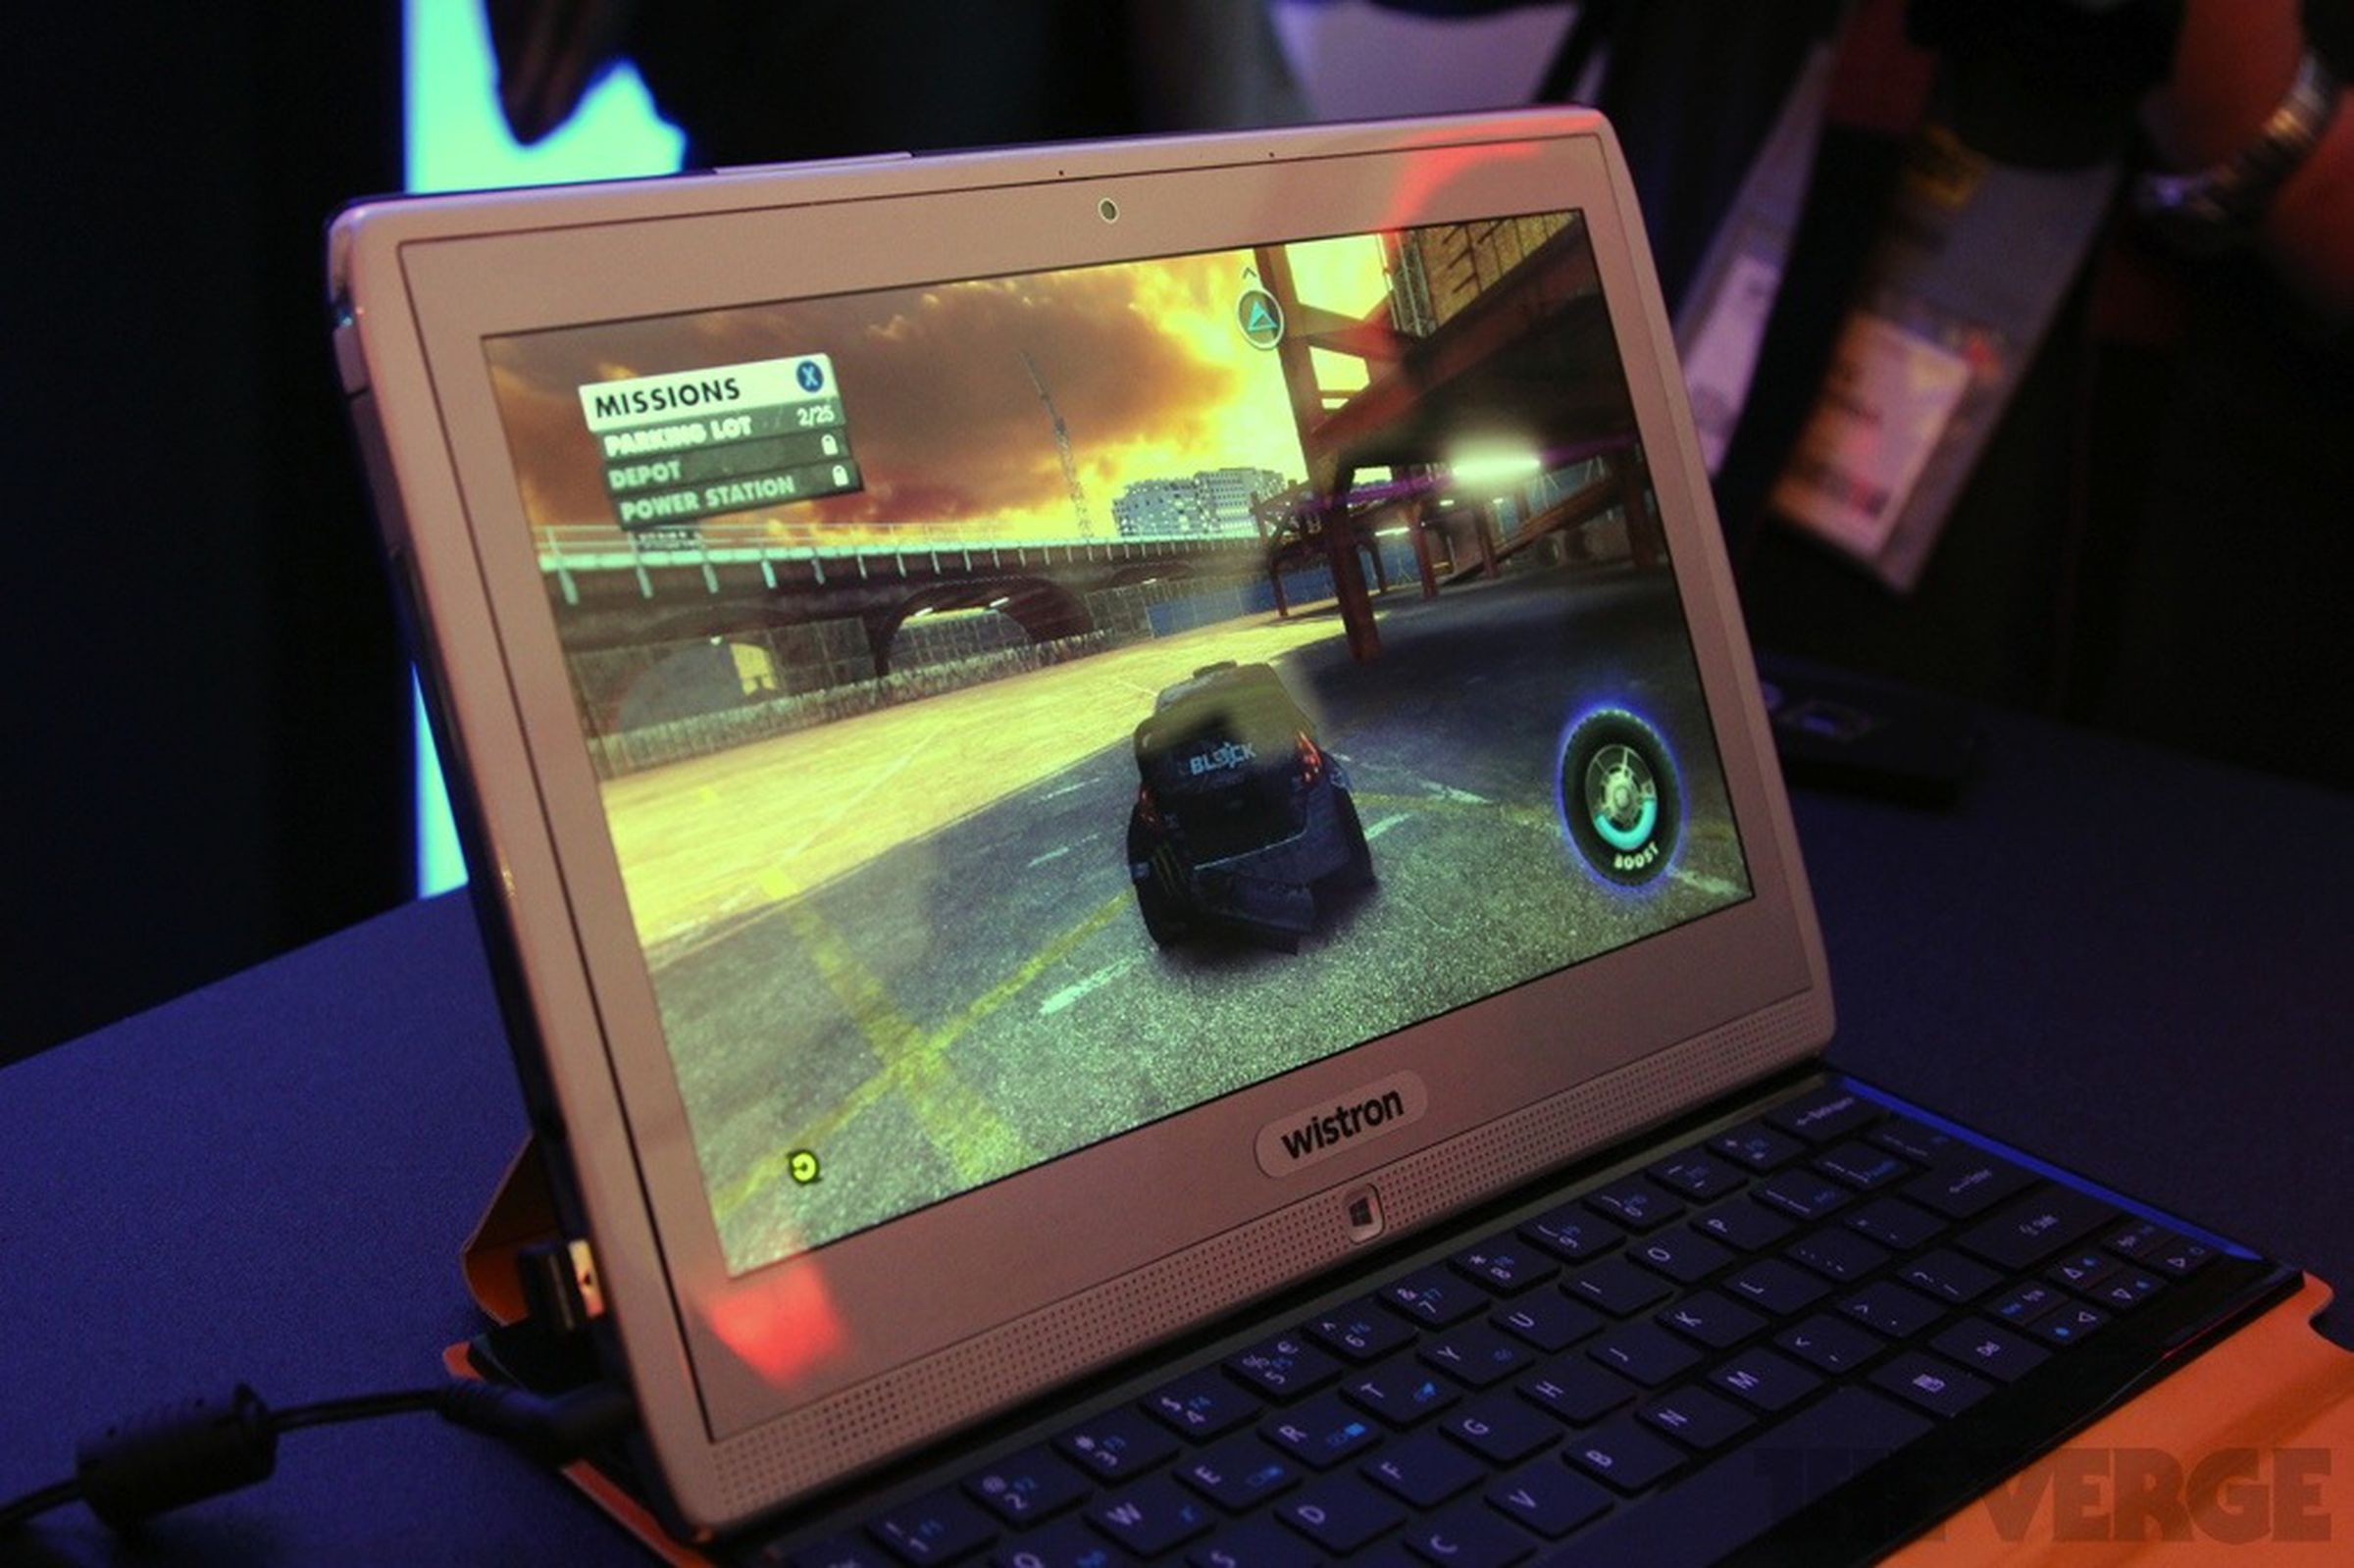 AMD Temash reference tablet hands-on pictures